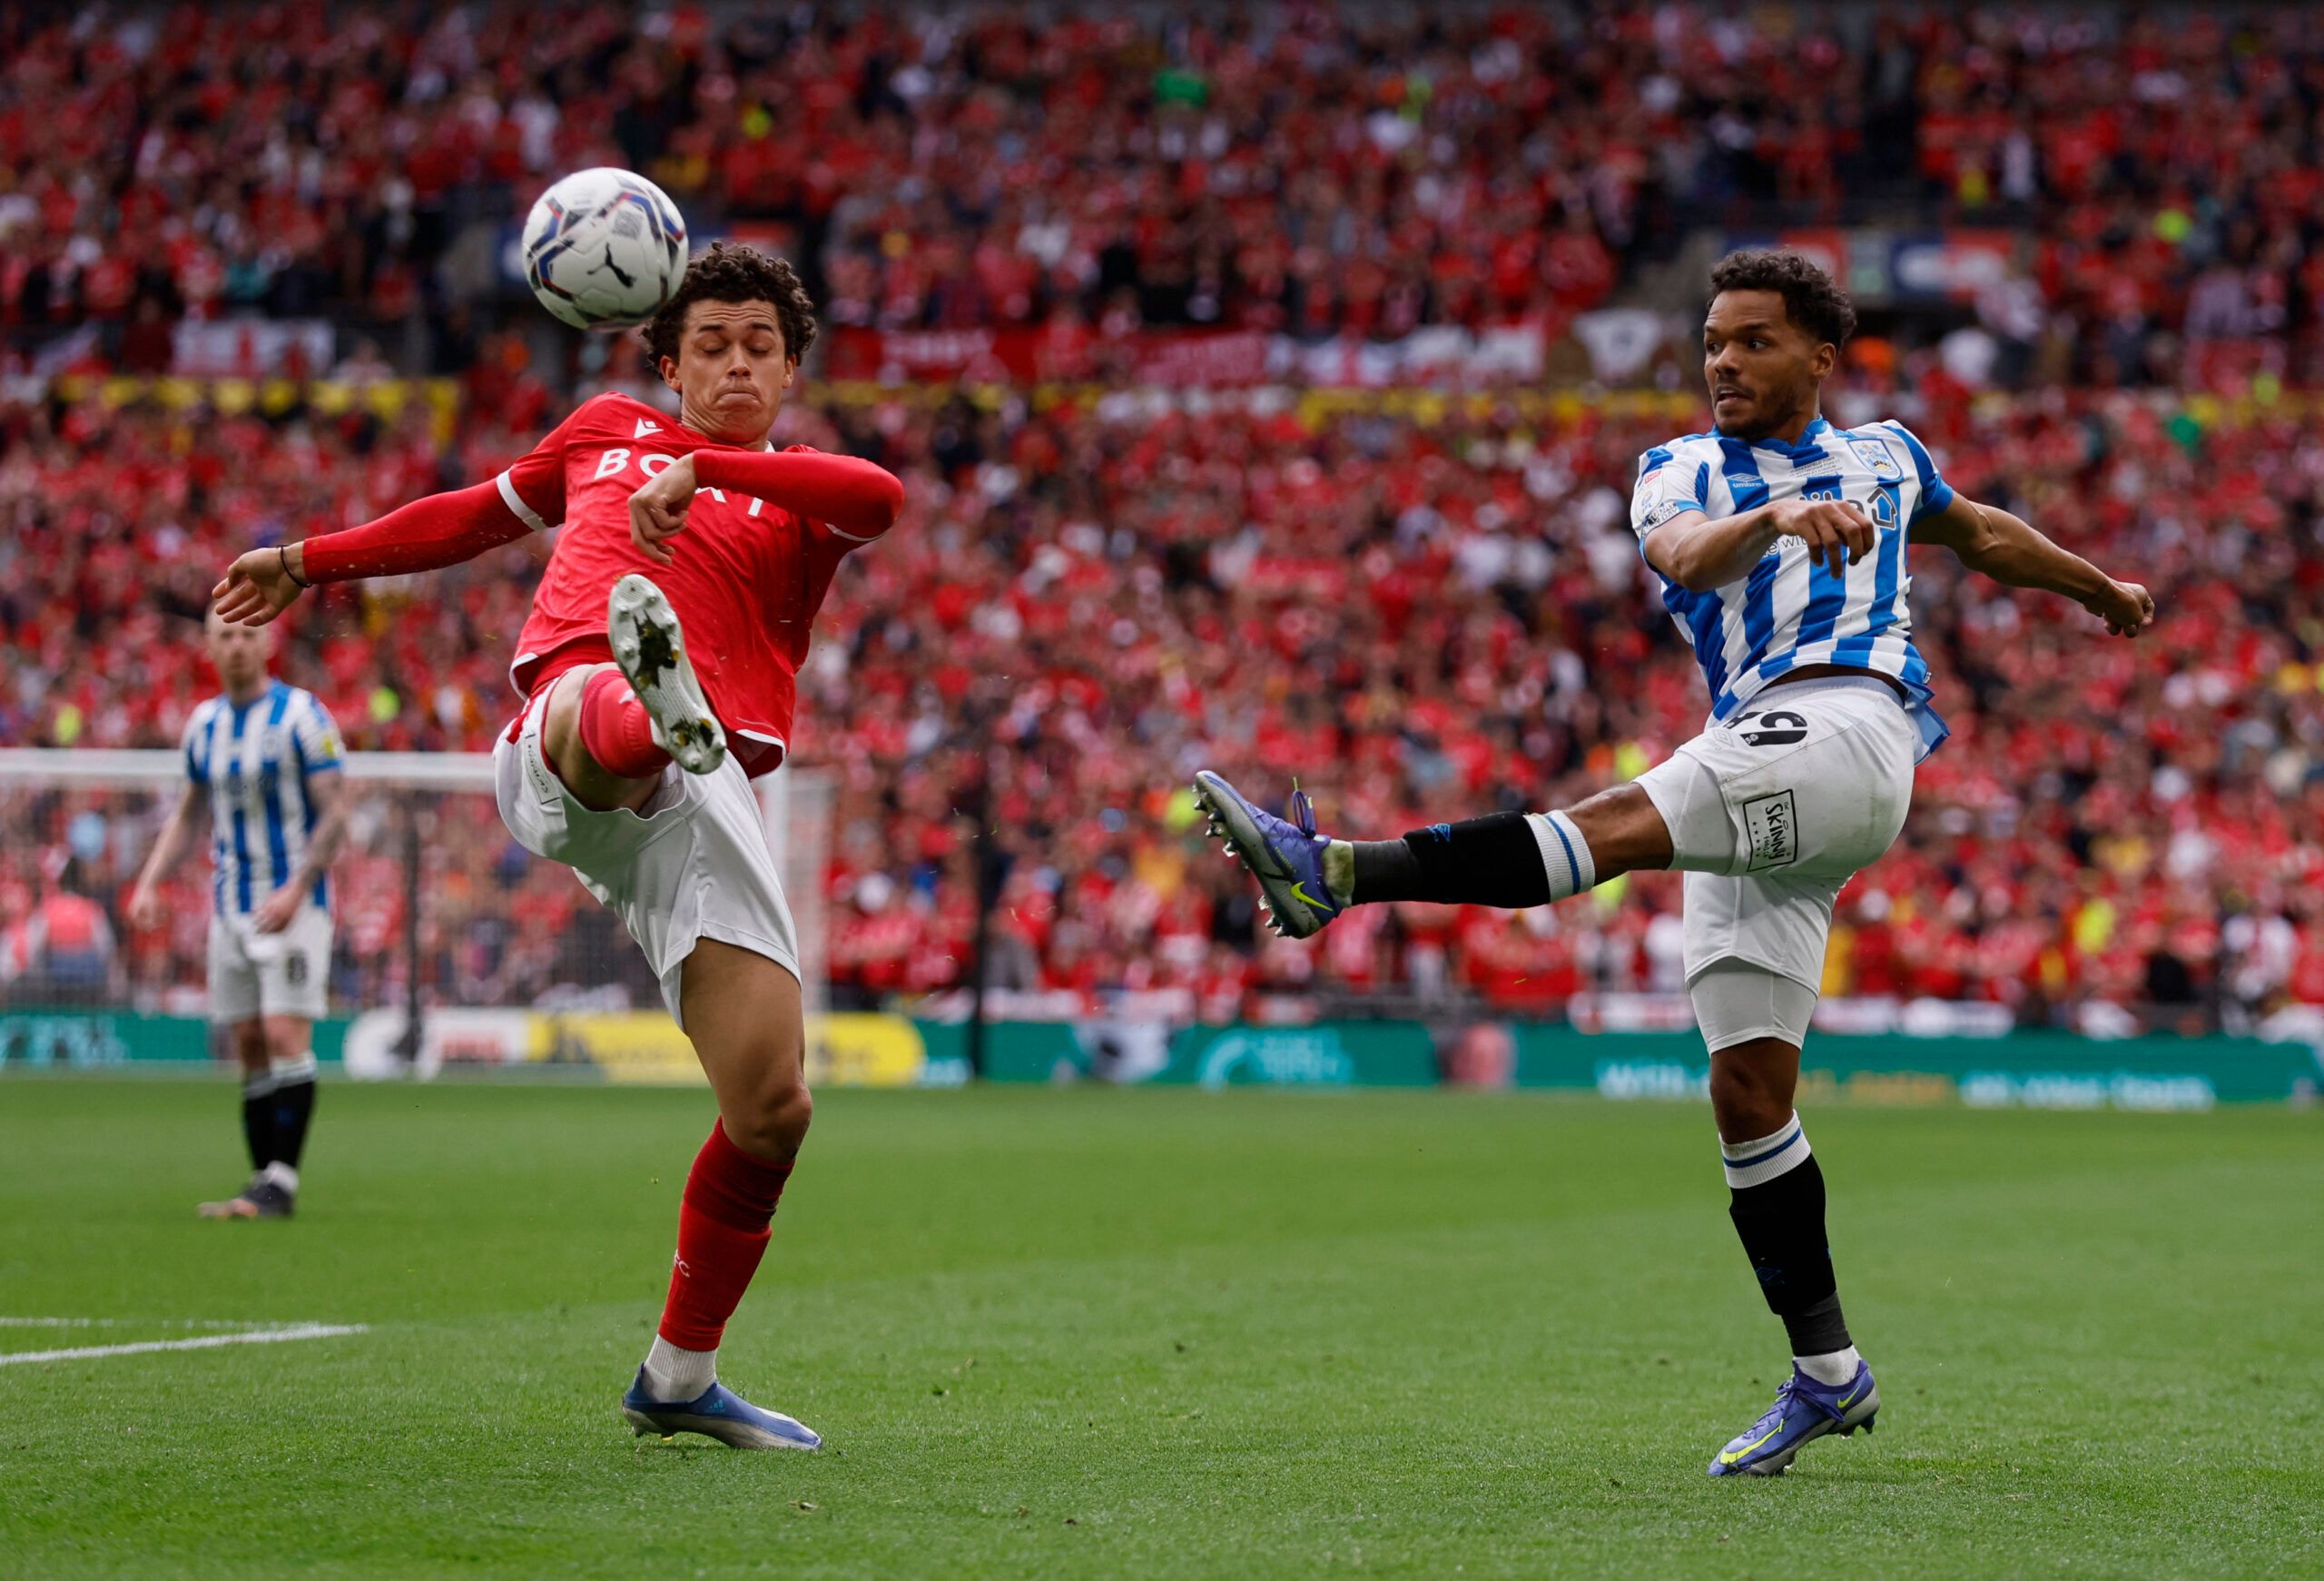 Soccer Football - Championship Play-Off Final - Huddersfield Town v Nottingham Forest - Wembley Stadium, London, Britain - May 29, 2022 Nottingham Forest's Brennan Johnson in action with Huddersfield Town's Duane Holmes Action Images via Reuters/Andrew Couldridge